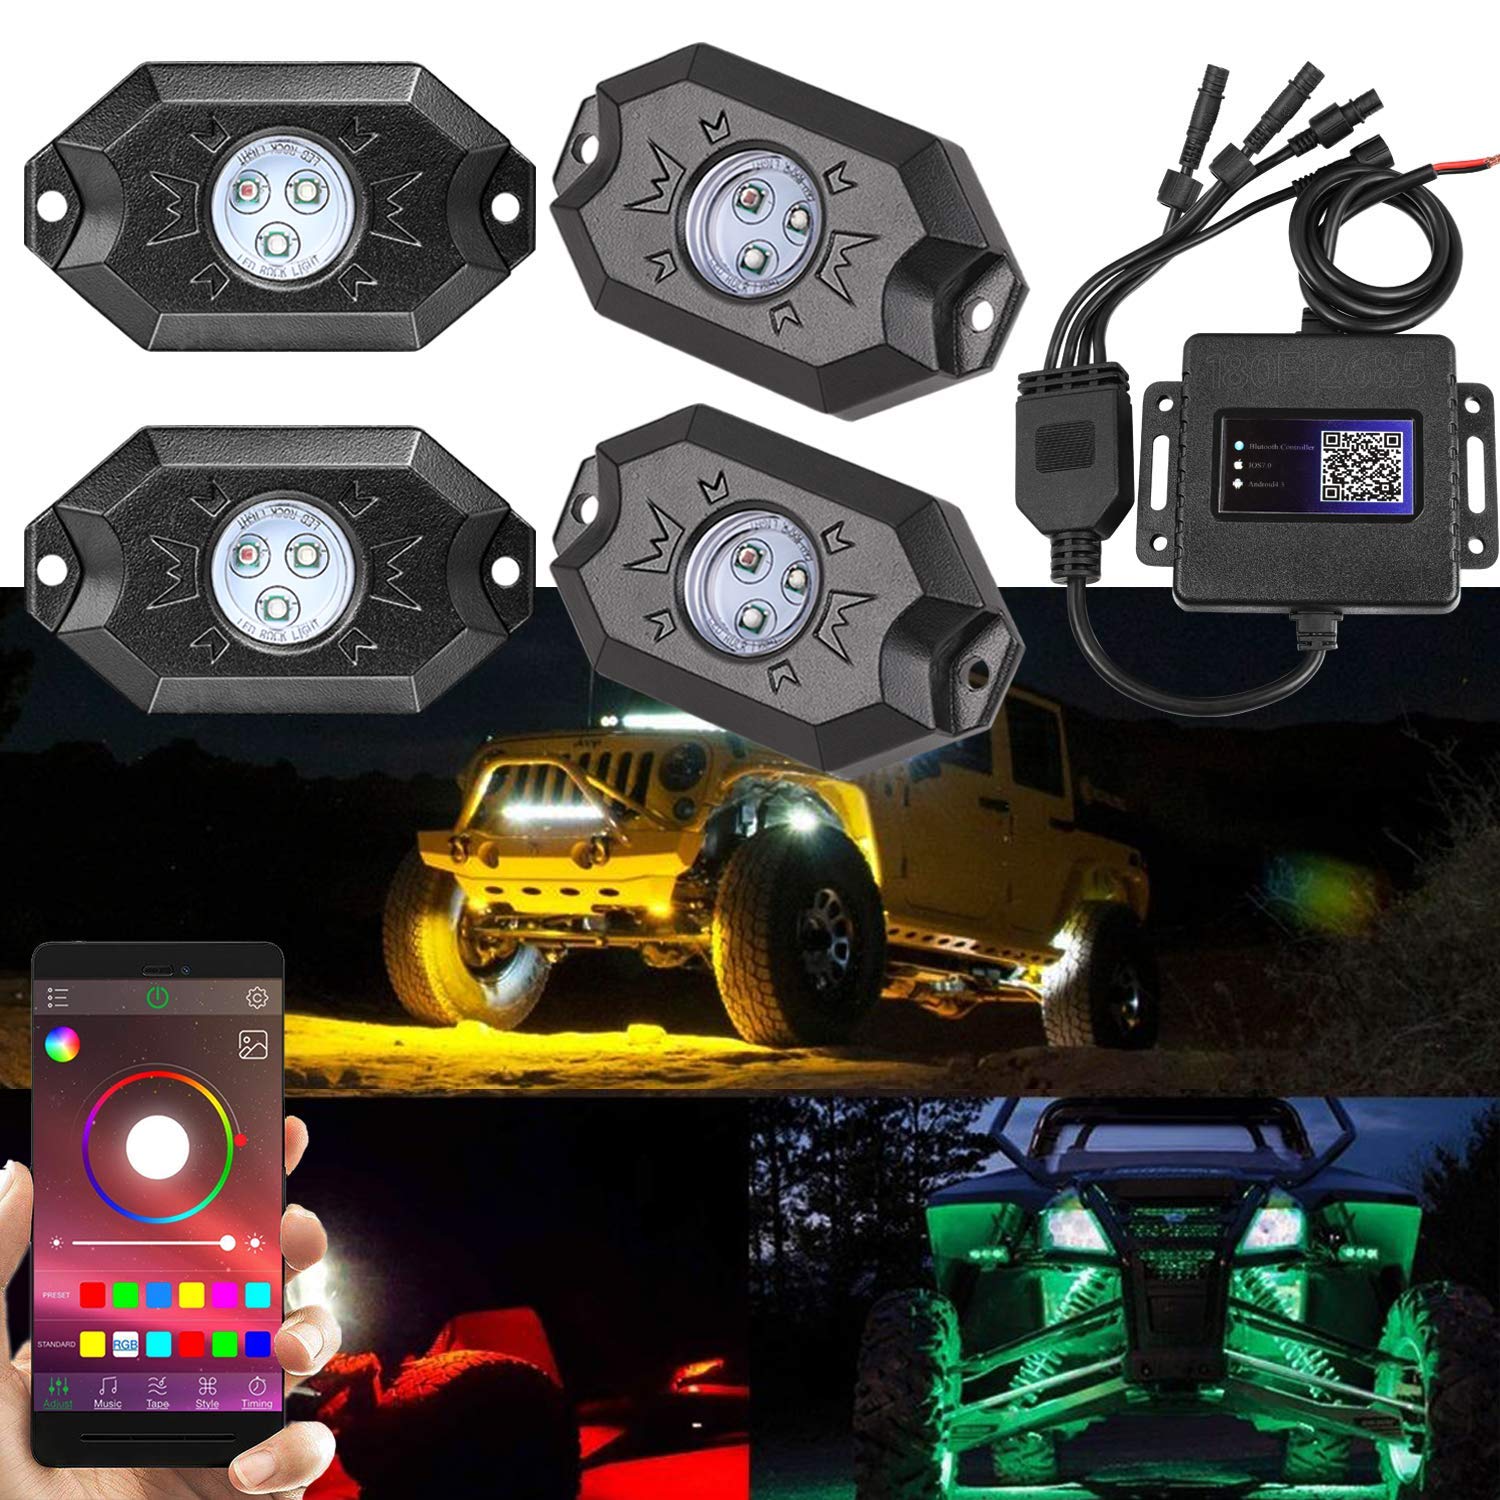 2nd-Gen RGB LED Rock Lights with Bluetooth Controller, Timing Function,Music Mode - 4 Pods Multicolor Neon LED Light Kit von Miners2000